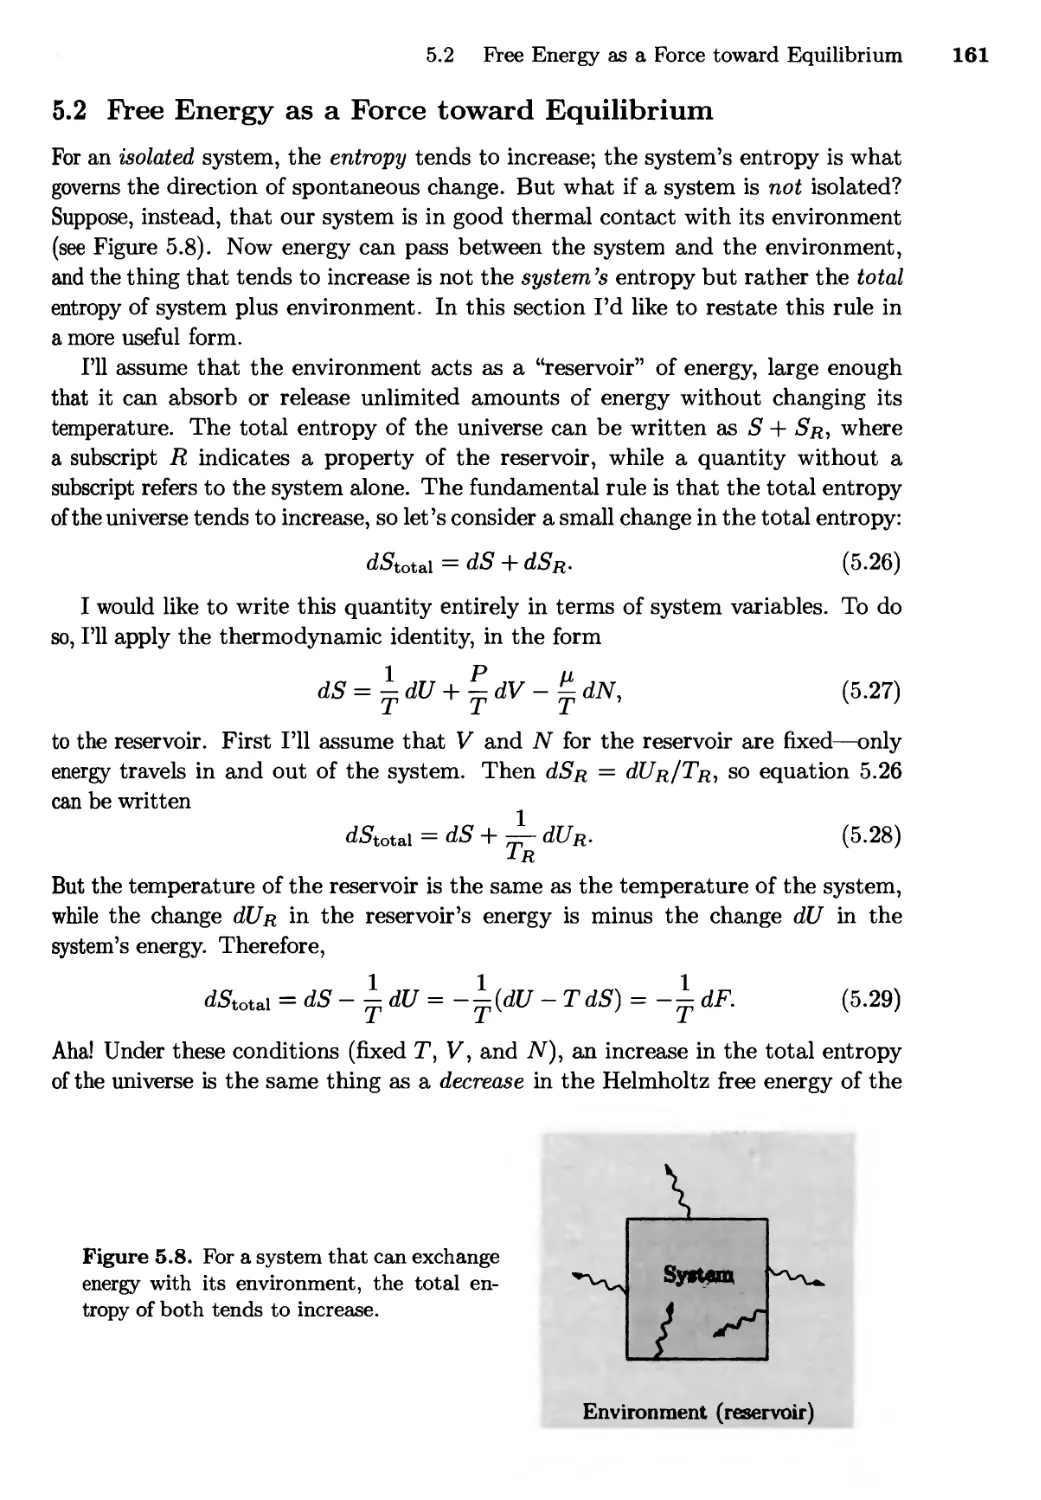 5.2 Free Energy as a Force toward Equilibrium